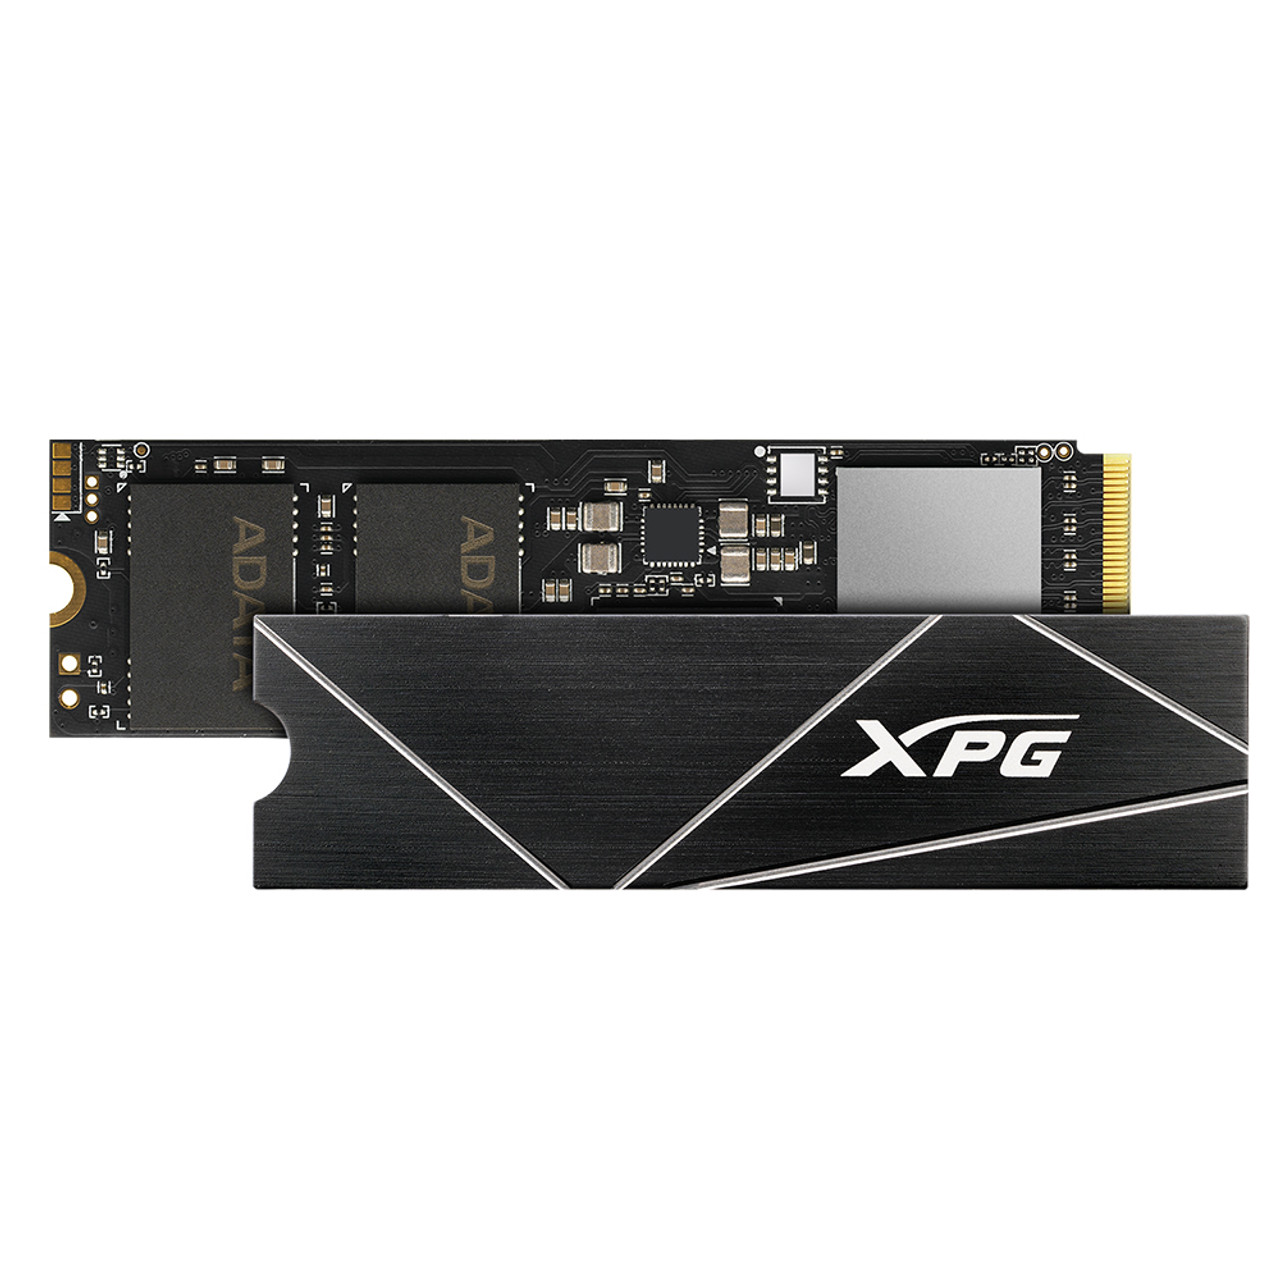 GAMMIX S70 Blade: 1TB M.2 2280 NVMe 3D NAND PCIe Gen4 Gaming Internal Solid State Drive | PS5 Compatible | Black SSD - XPG